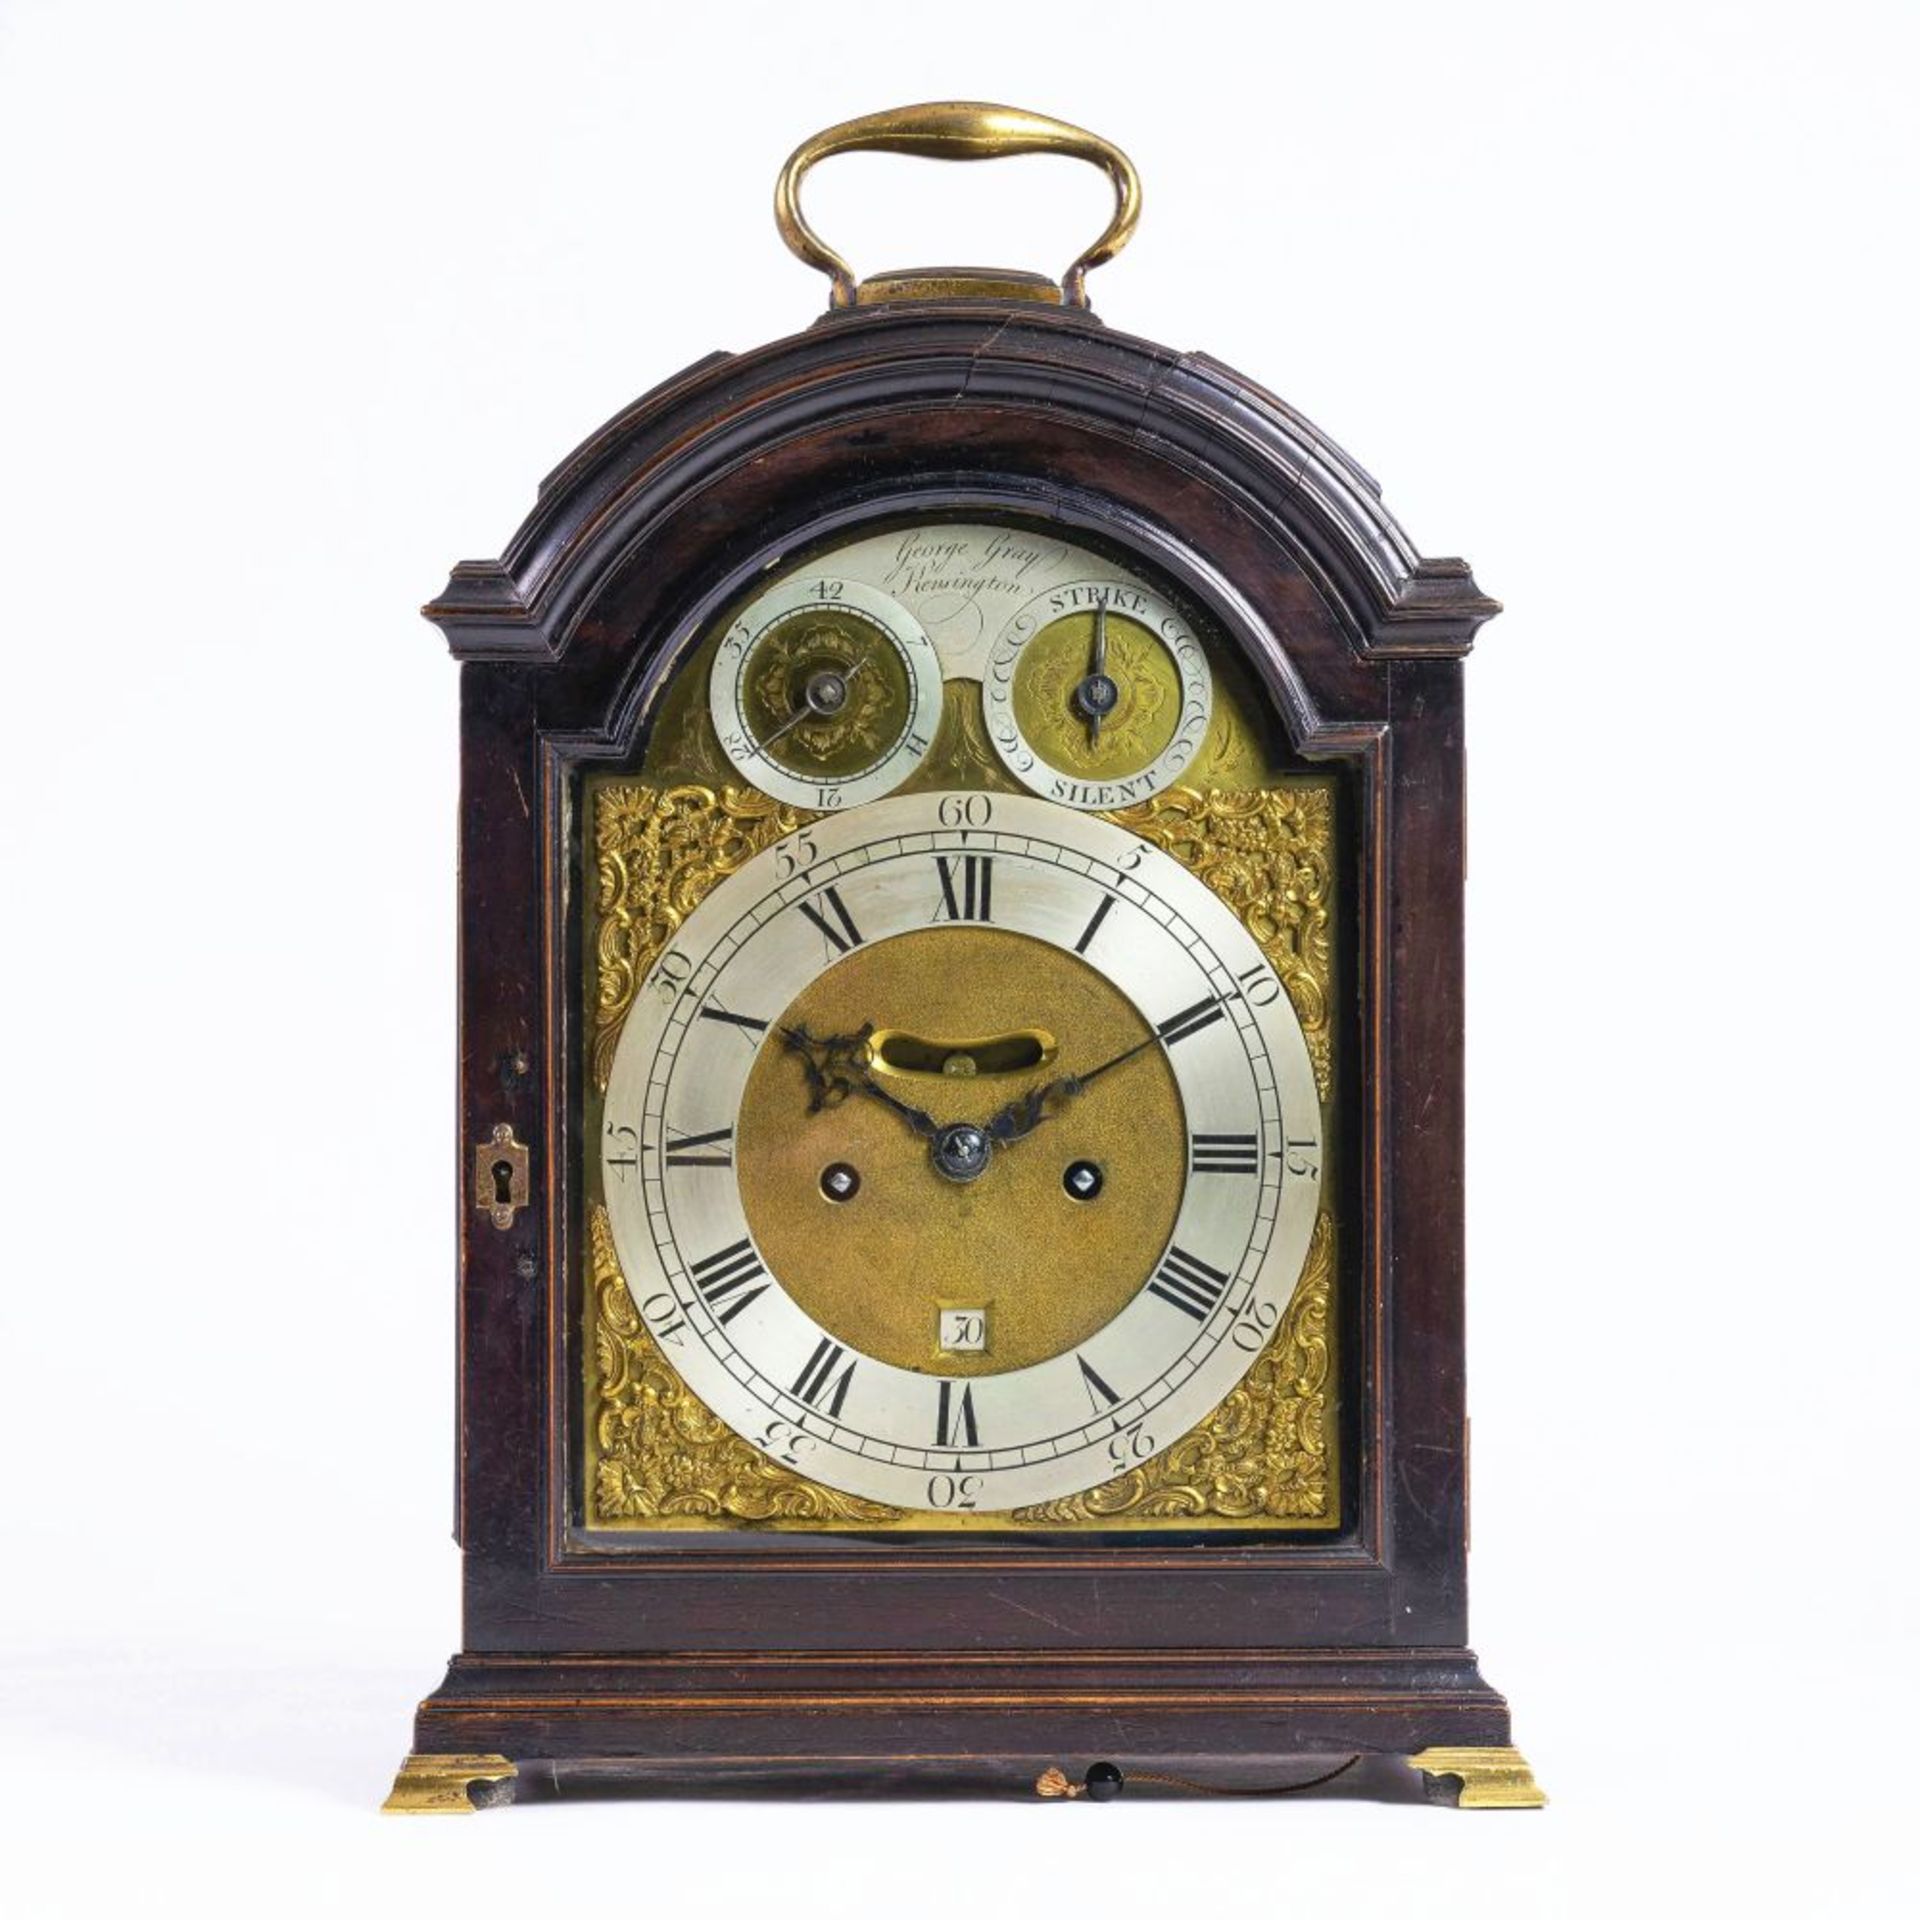 Gray, George England 18th cent. A George III Bracket Clock with Repetition.